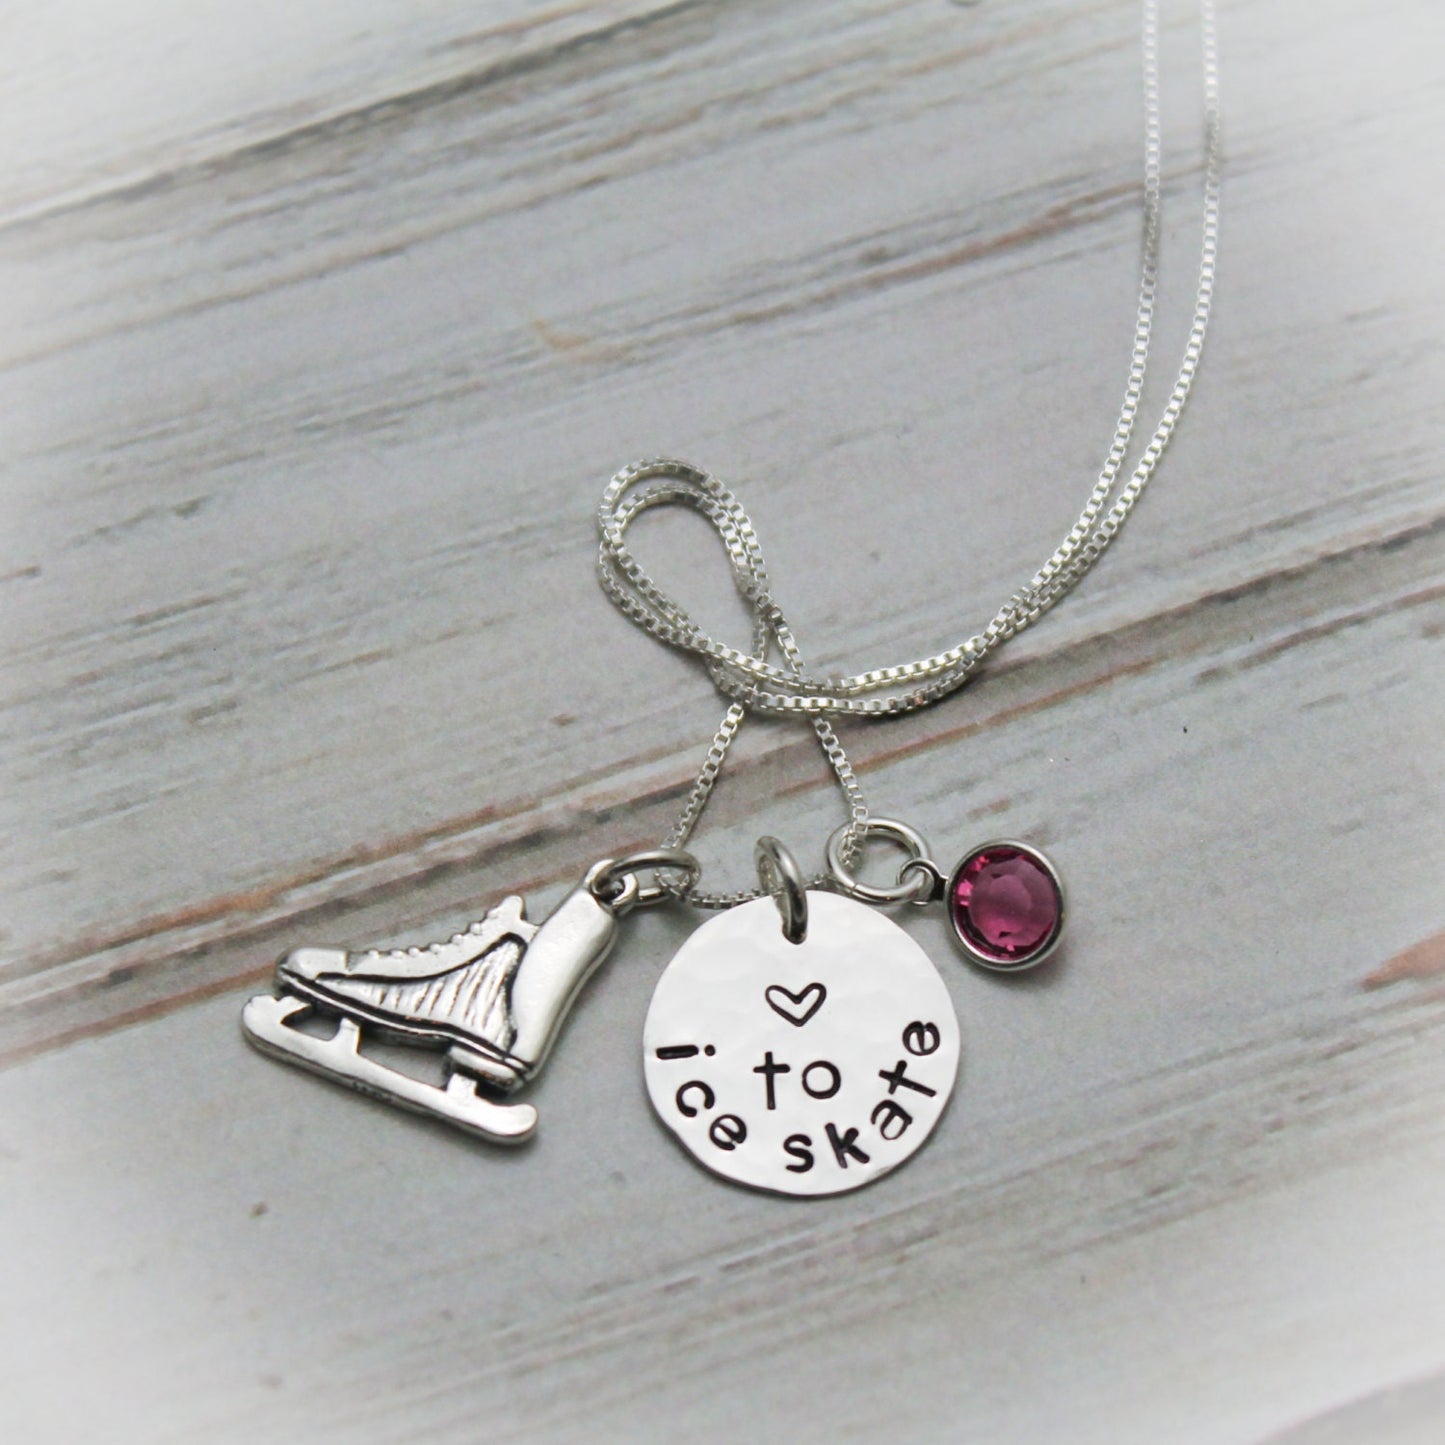 Personalized Ice Skating Necklace, Ice Skater Jewelry, Ice Skate Jewelry, Hand Stamped Jewelry